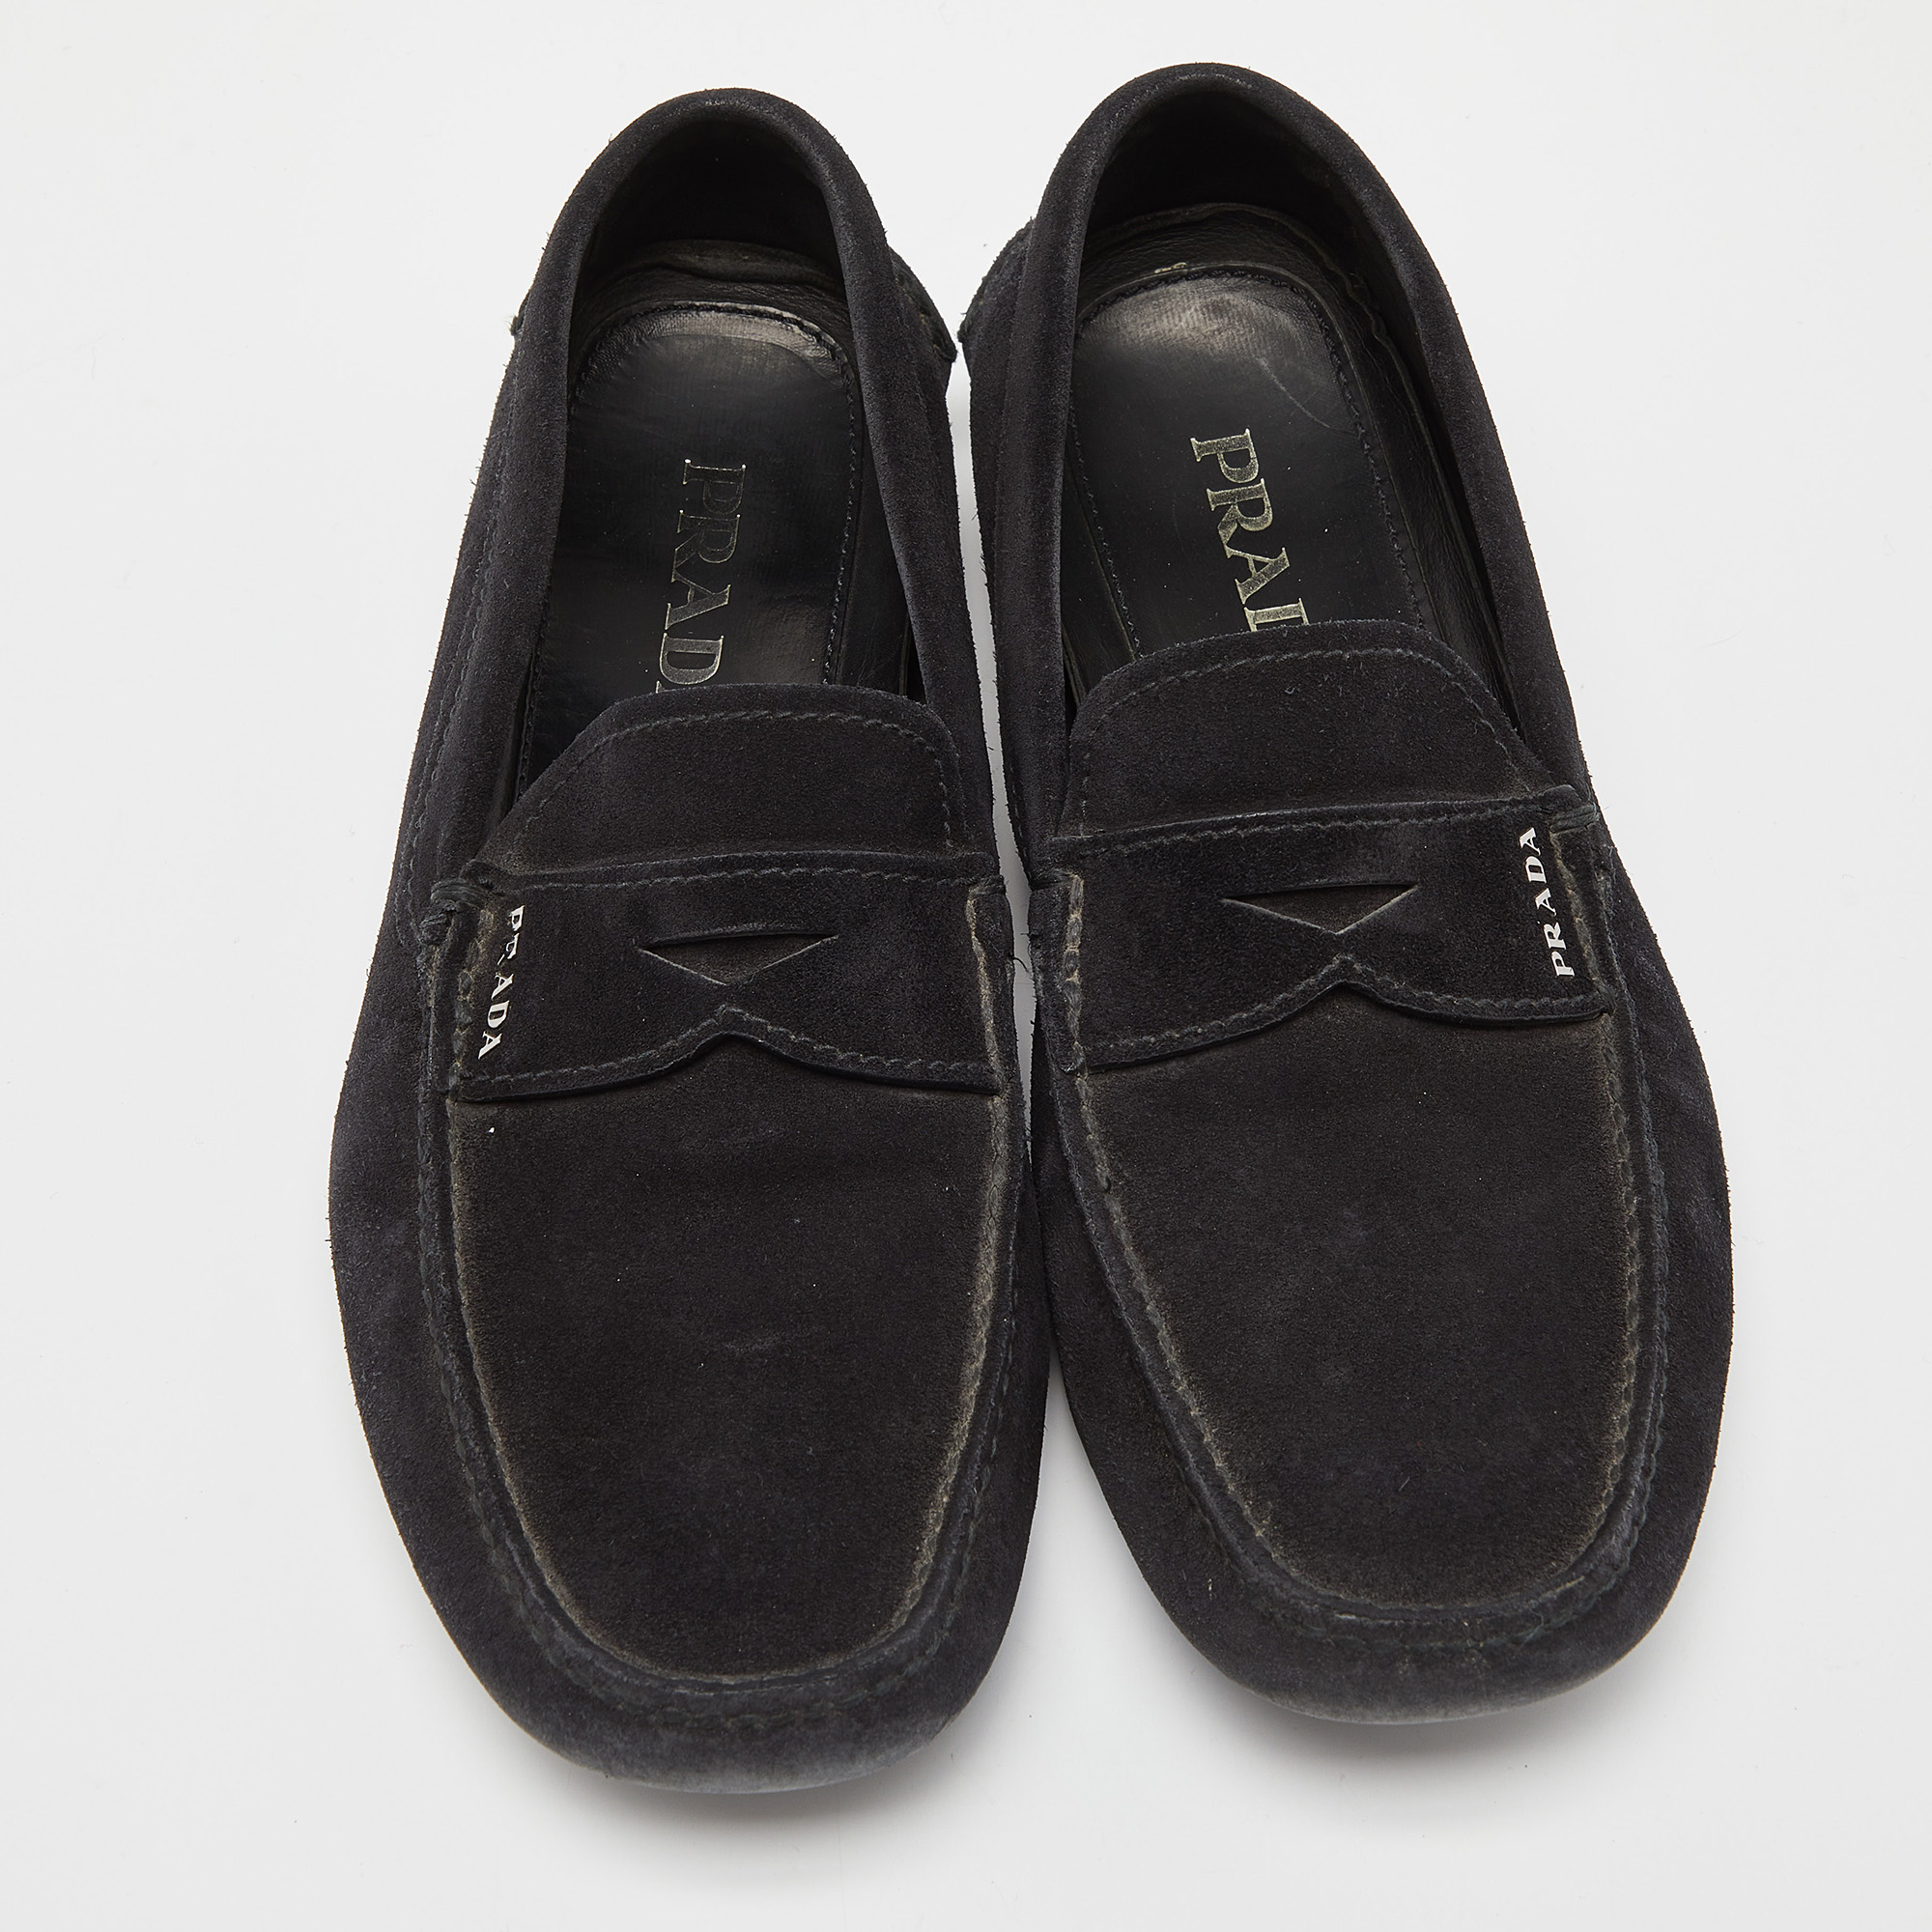 Prada Black Suede Penny Loafers Size 40.5